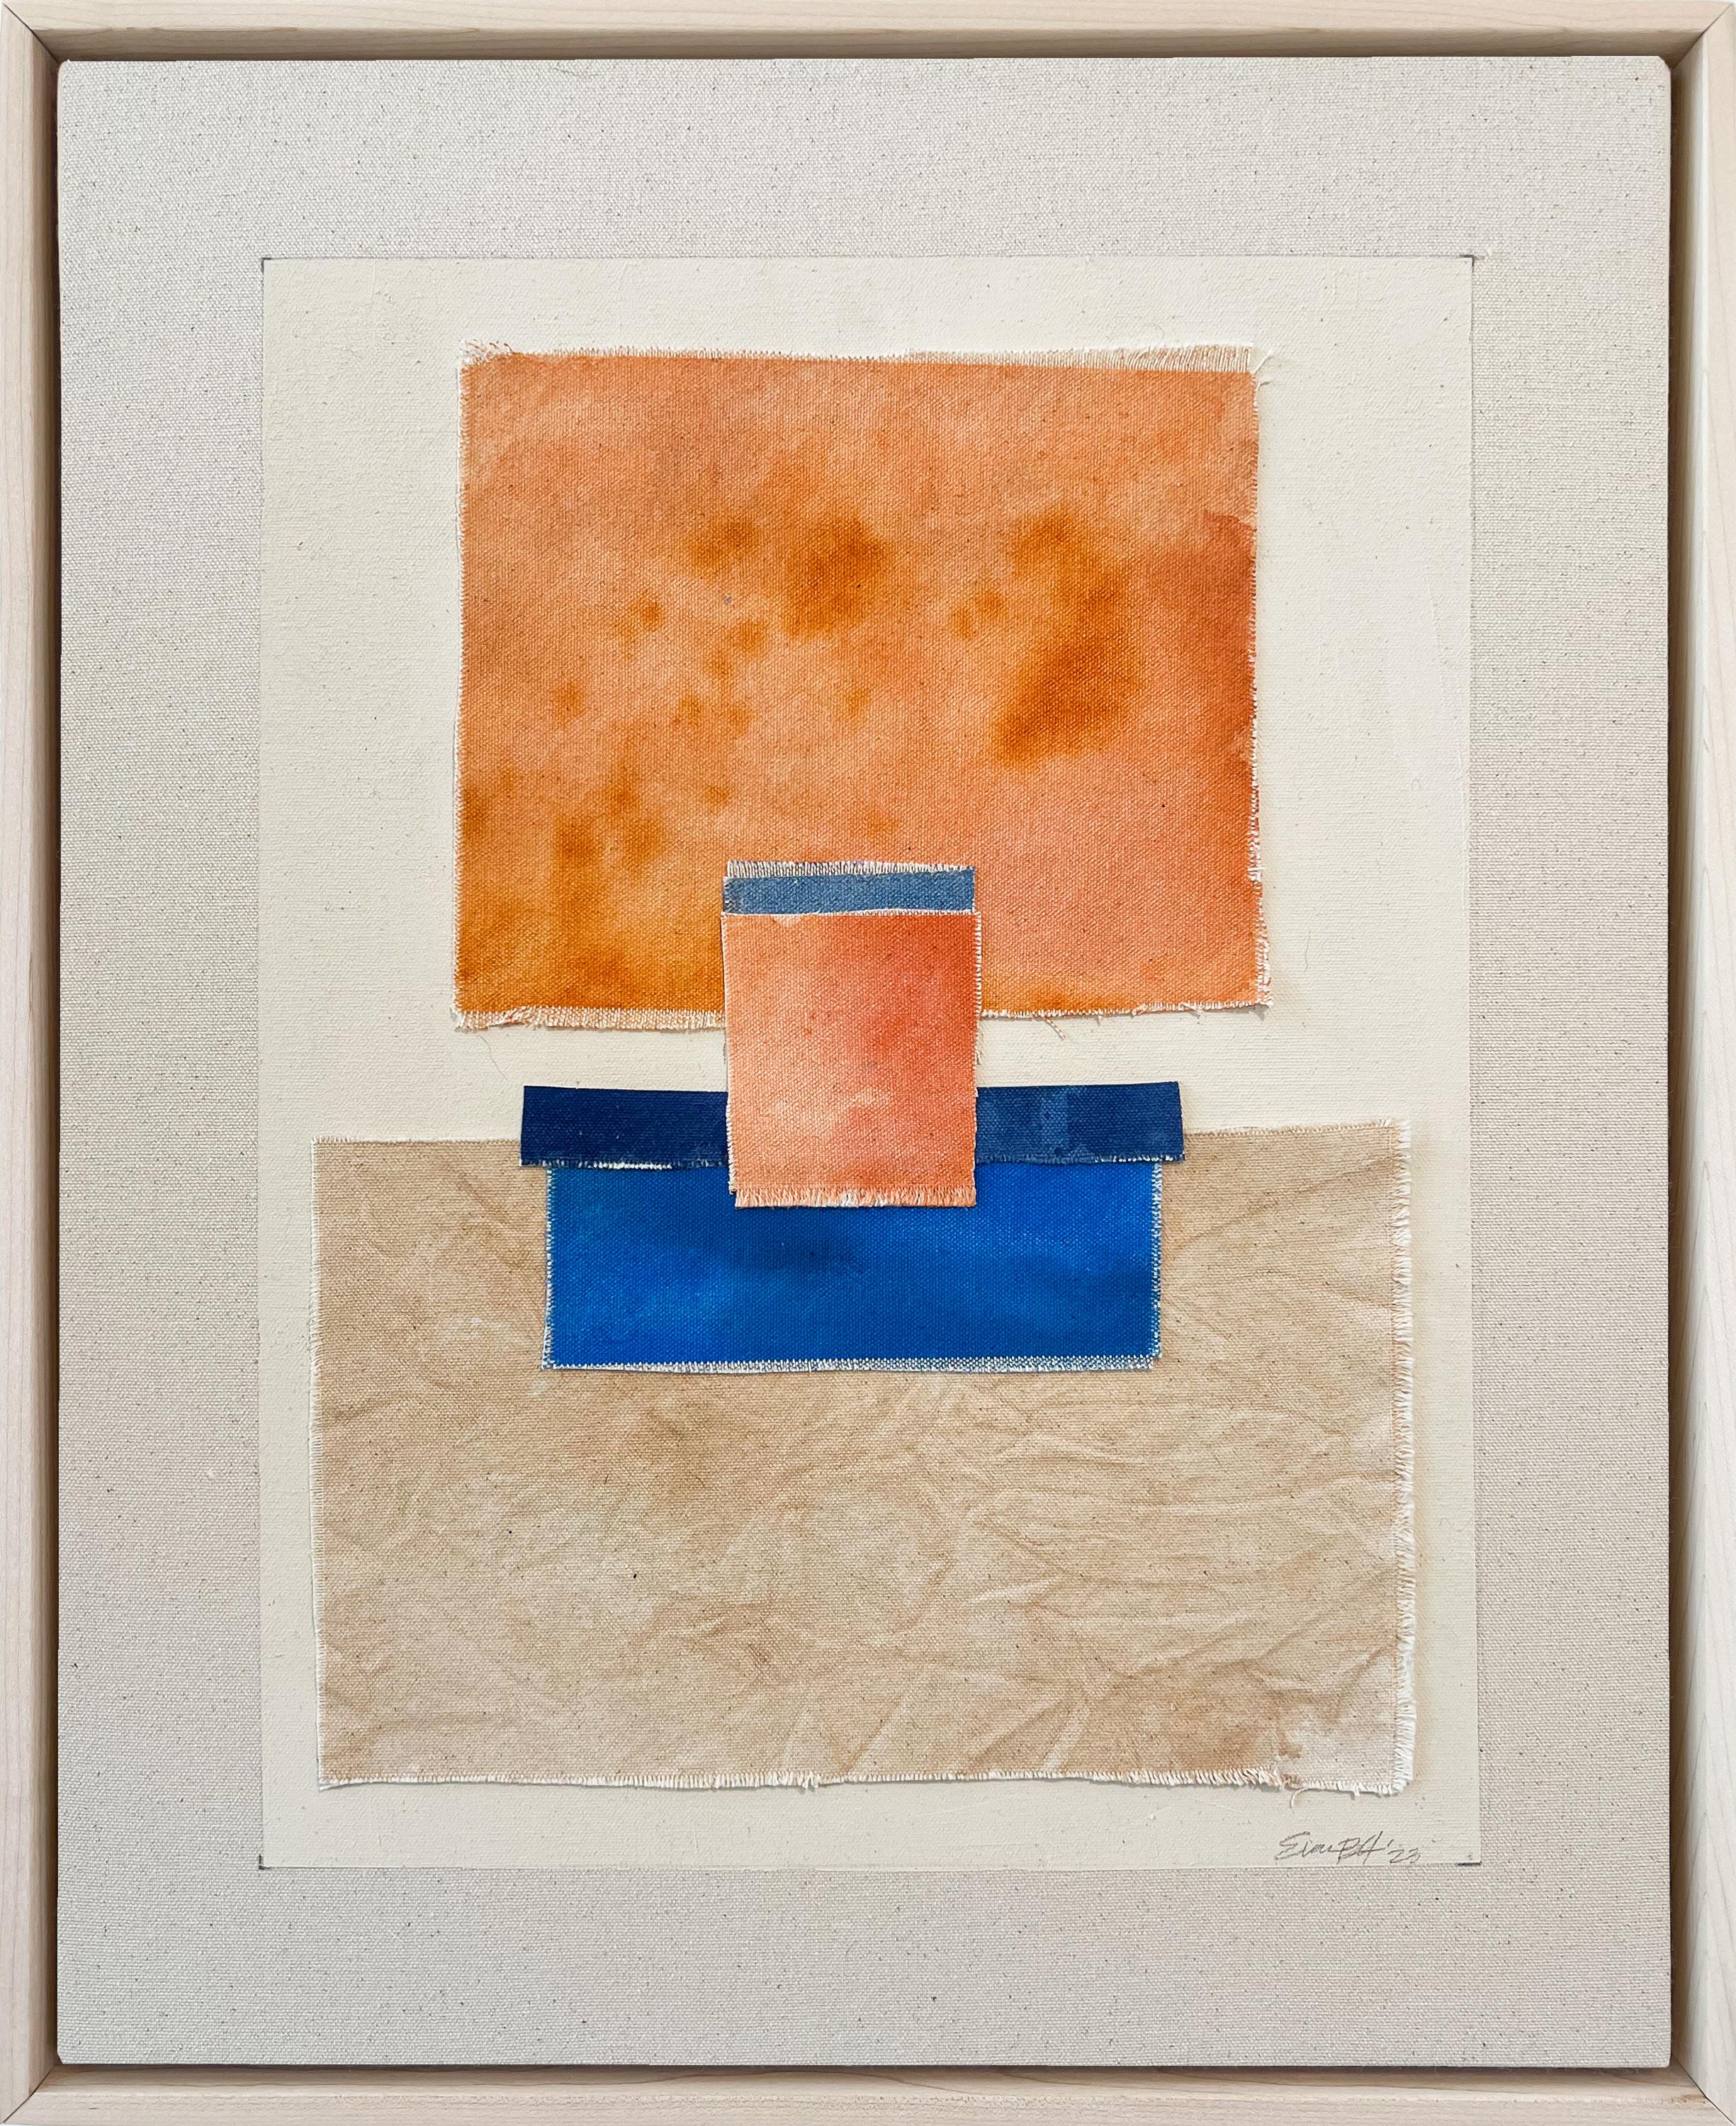 This work on canvas is a mixed media abstract work featuring hues of blue, orange, and tan.
Framed in a natural wood floater frame measuring 20 by 16 inches.

Evan is inspired by the works of Frank Bowling, Helen Frankenthaler, Candida Alvarez and